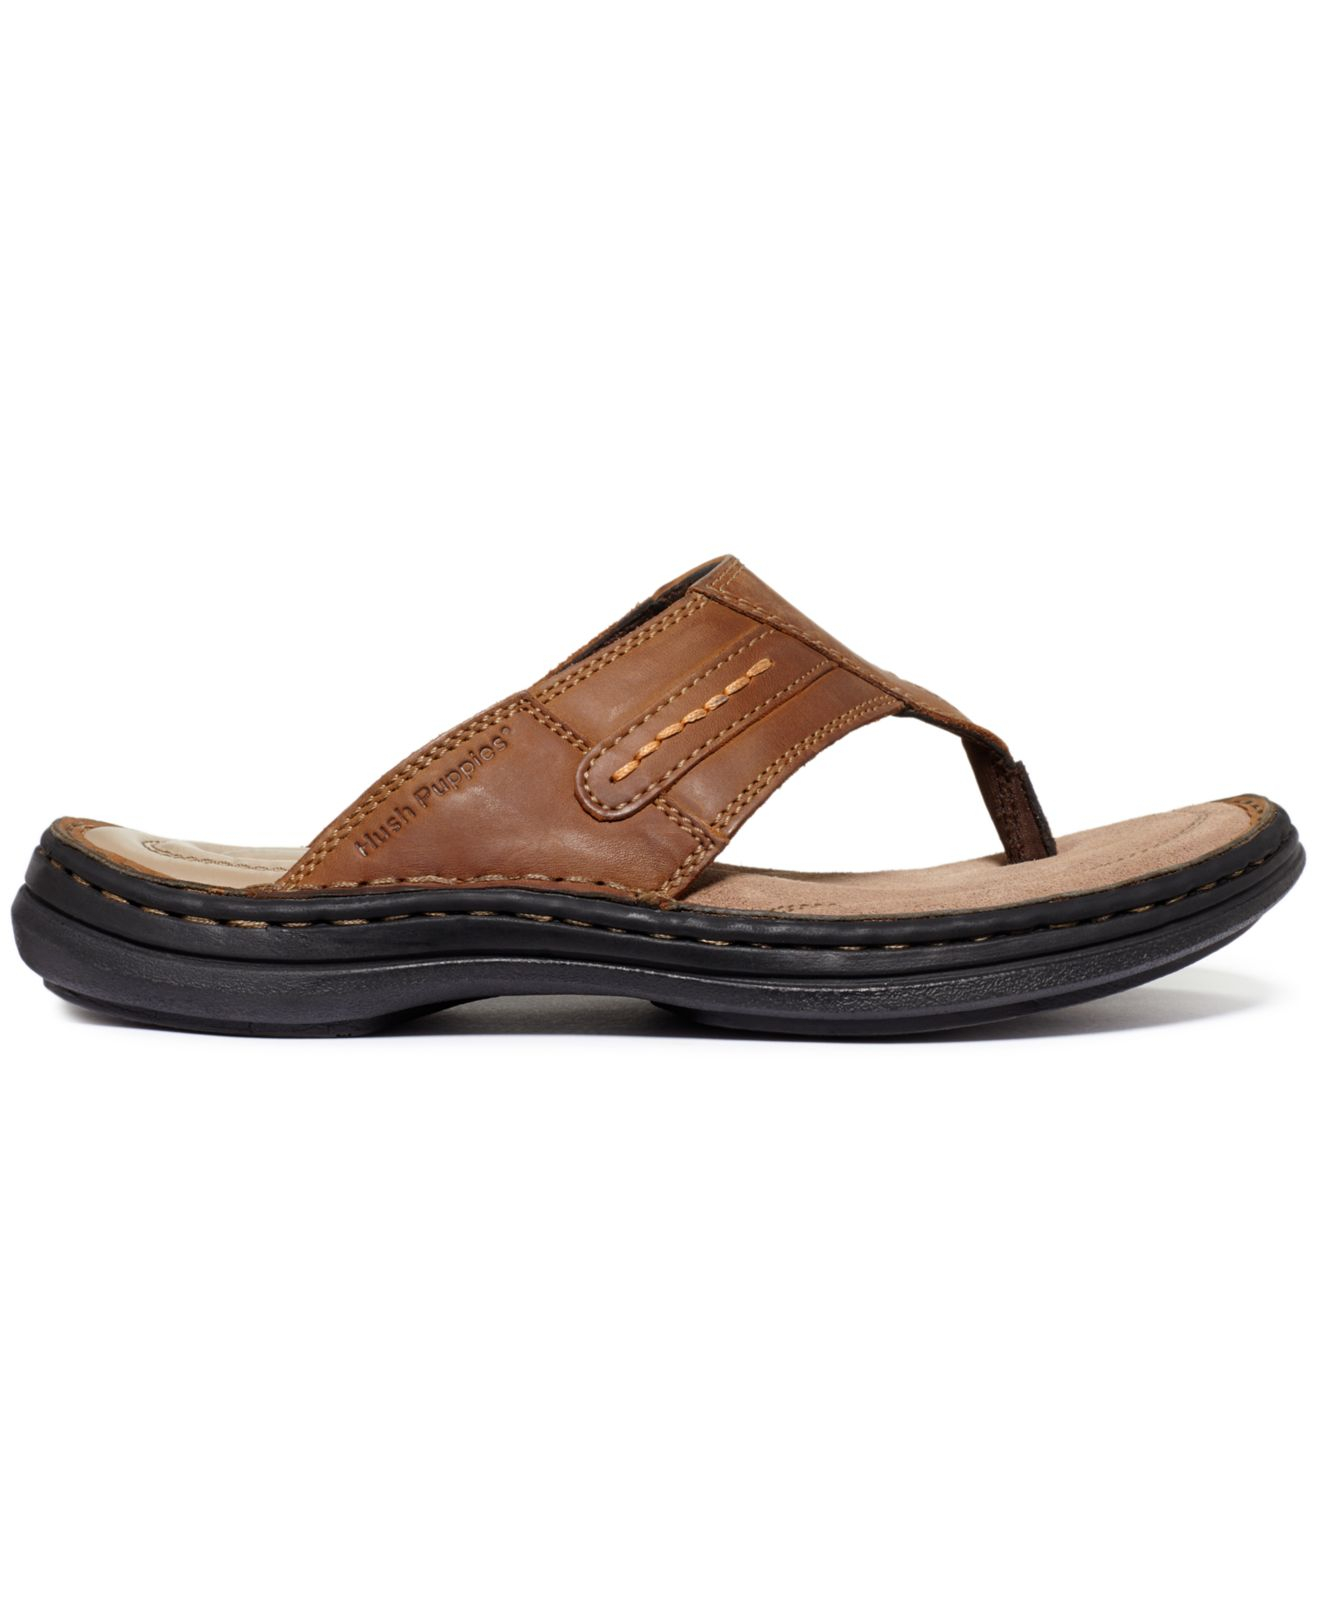 Lyst - Hush Puppies Relief Toe Post Sandals in Brown for Men